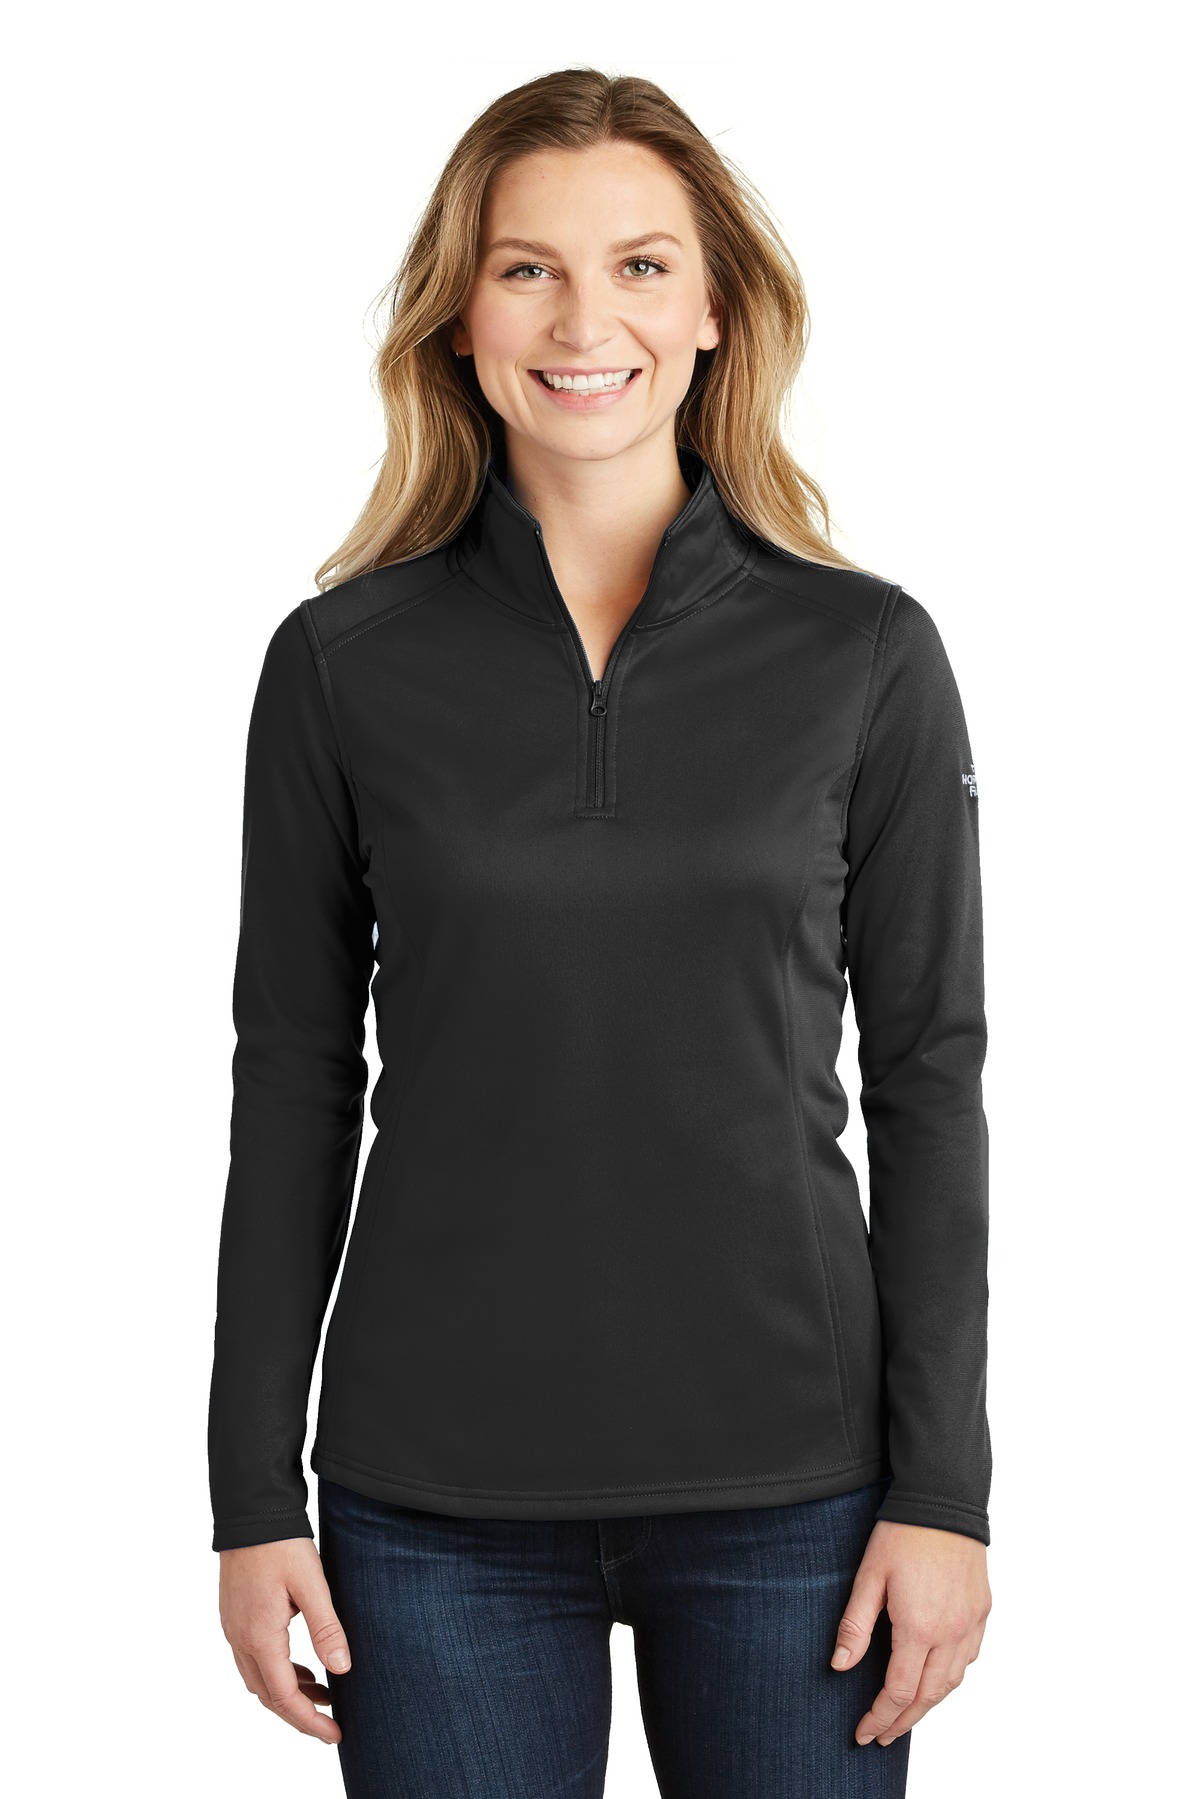 The North Face Ladies Outerwear Sweatshirts & Fleece for Hospitality ® Ladies Tech 1/4-Zip Fleece.-The North Face